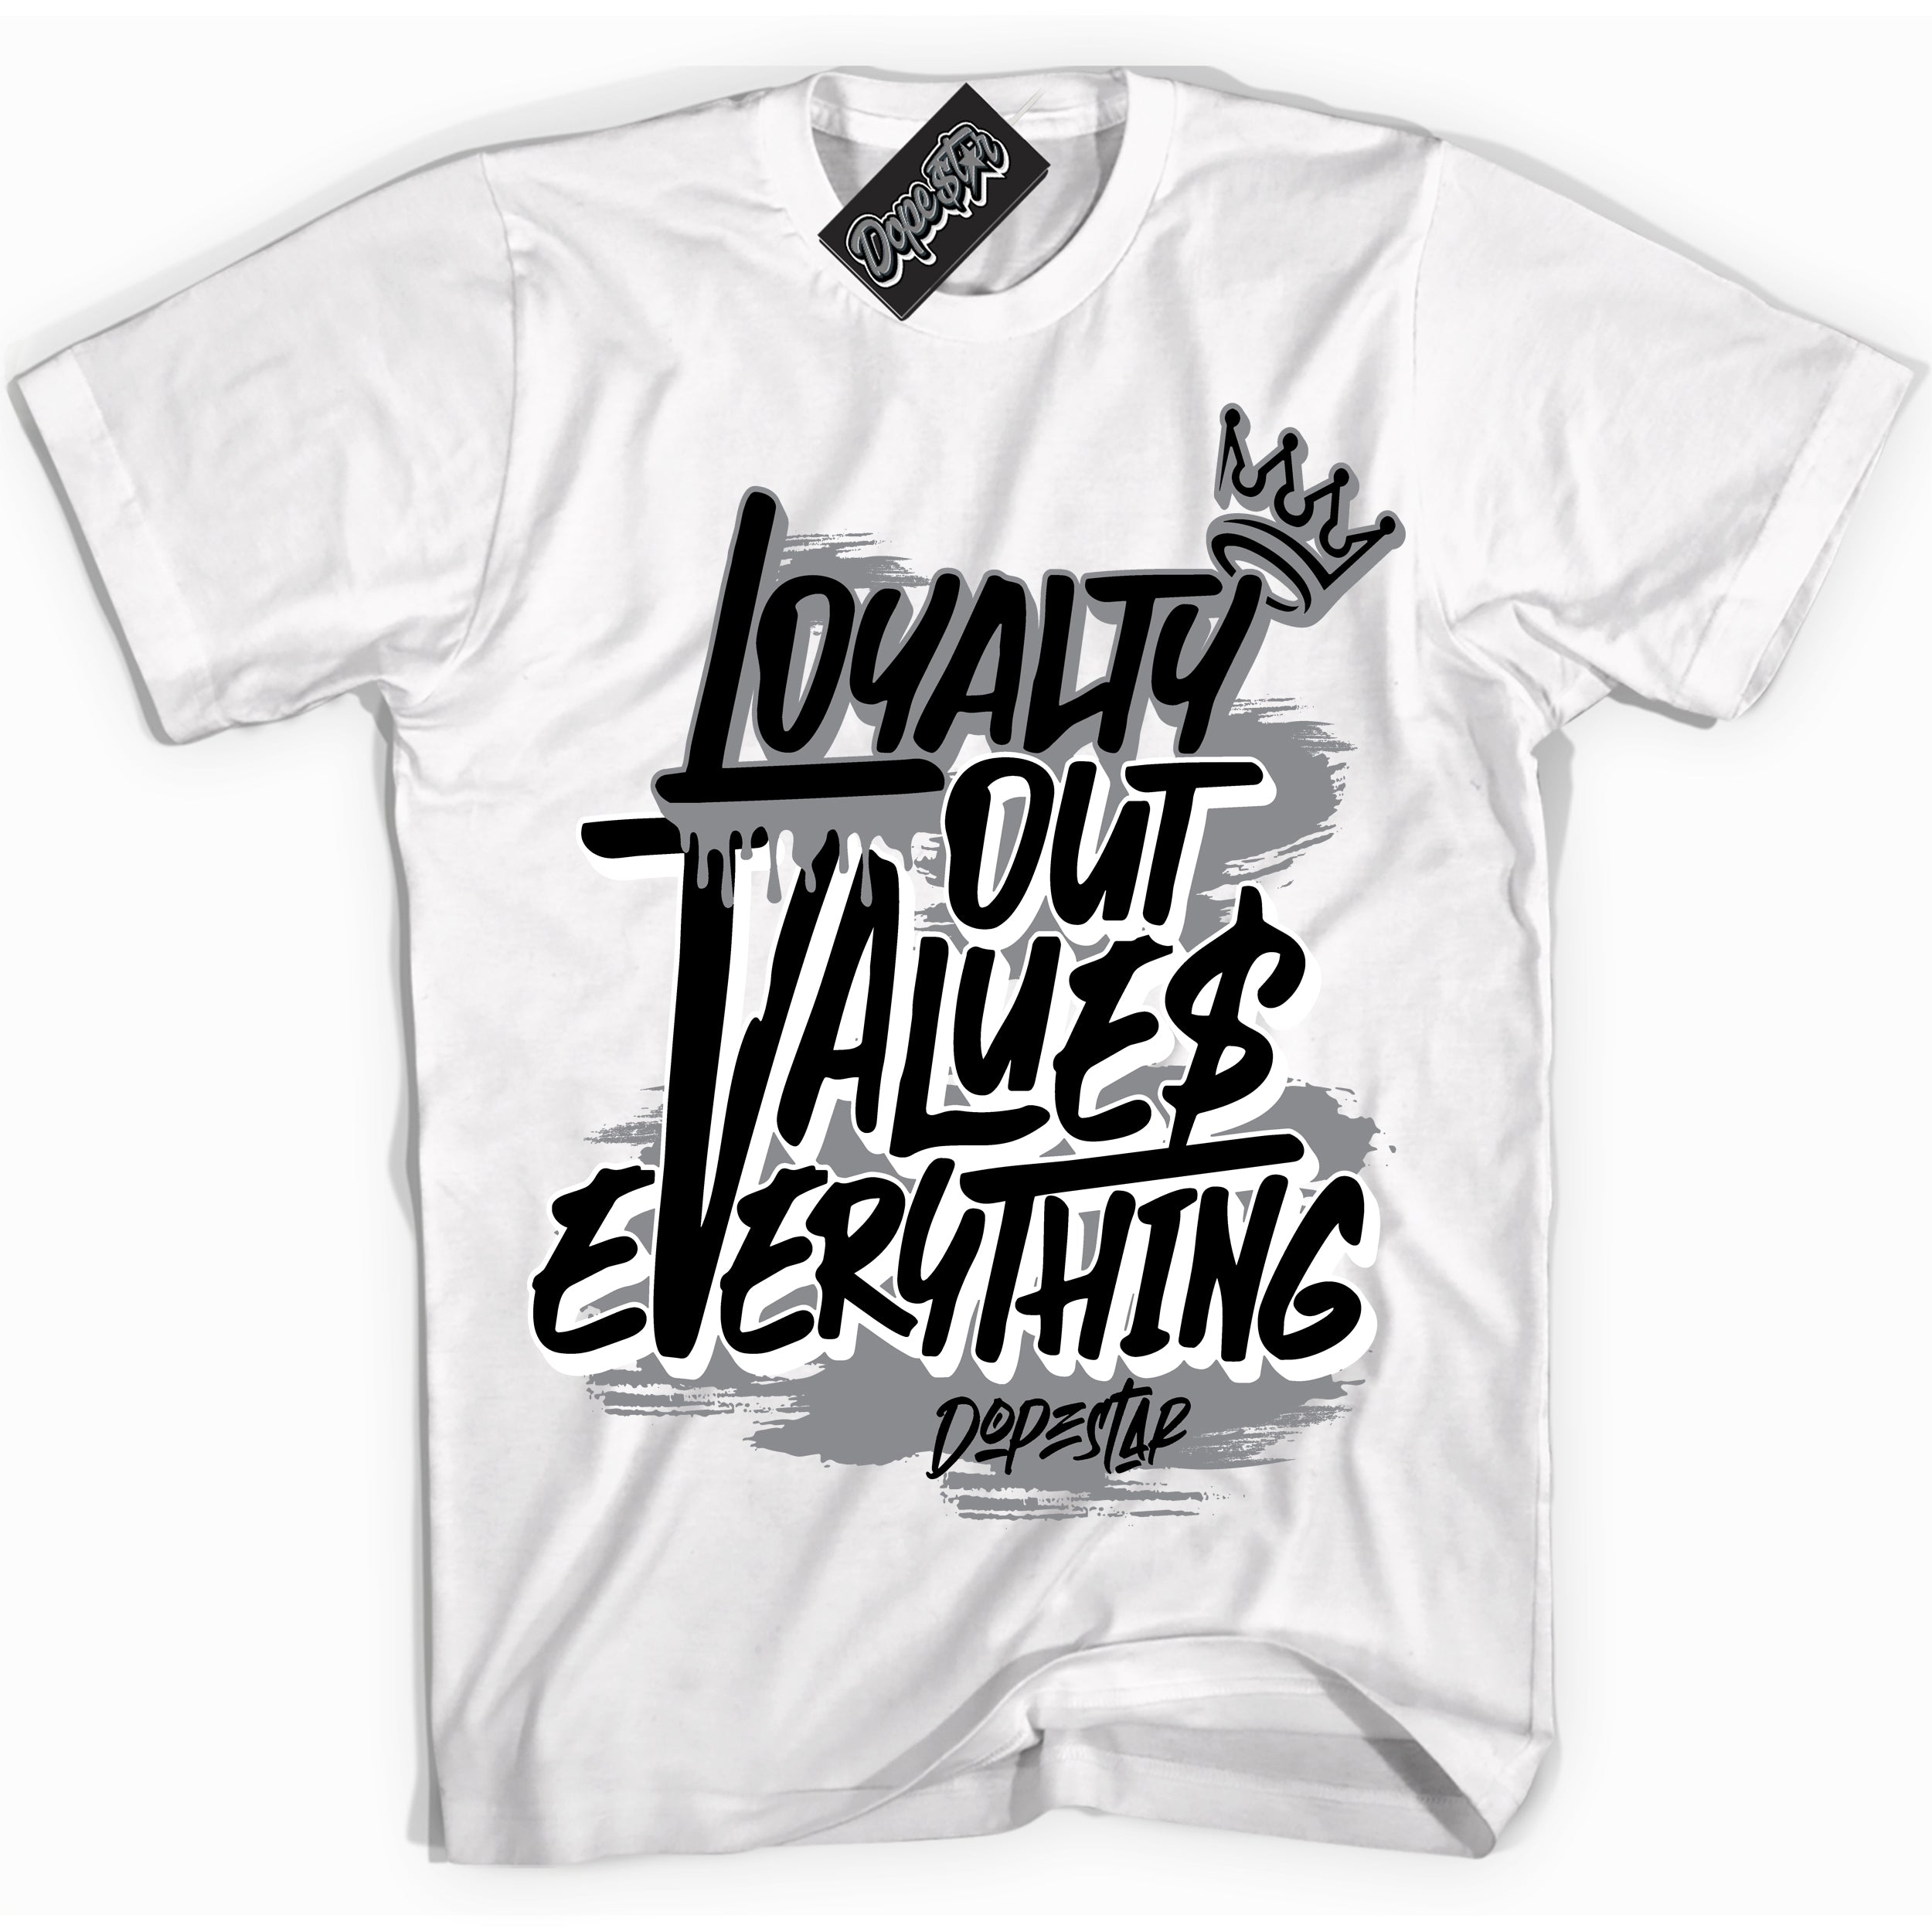 Cool White Shirt with “ Loyalty Out Values Everything” design that perfectly matches SE Black Canvas 4s Sneakers.